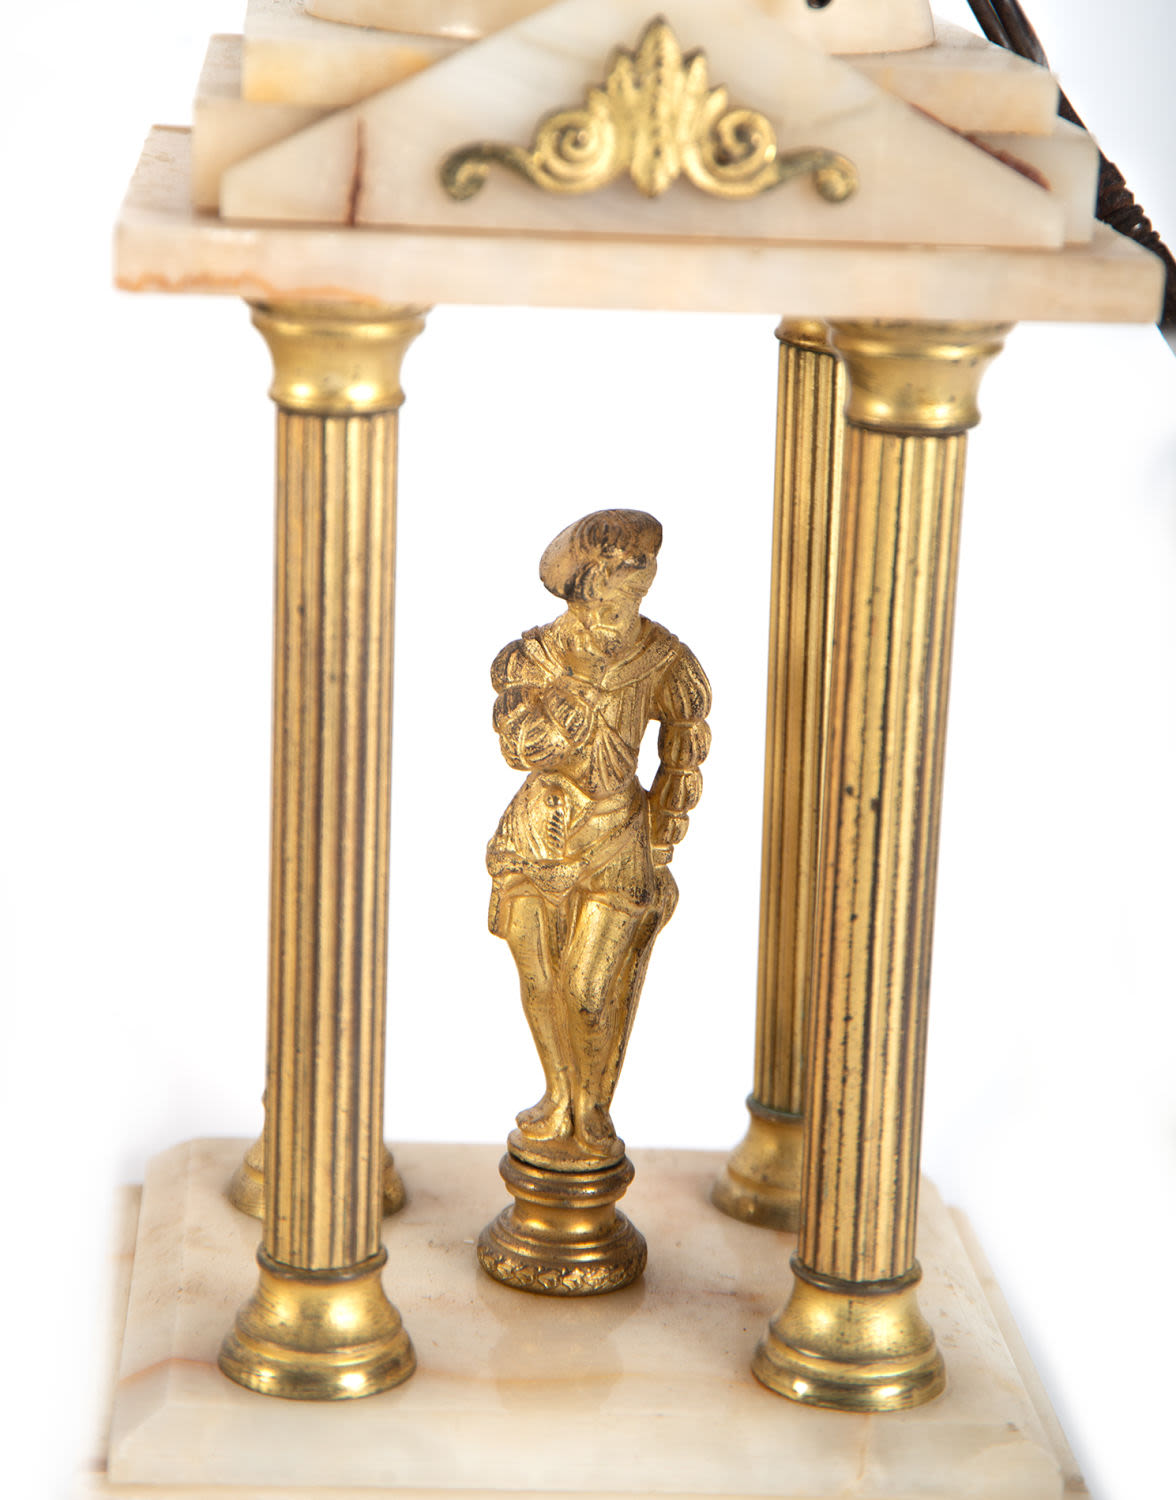 Neoclassical garniture in alabaster with temples and figures in gilt bronze - Image 6 of 8